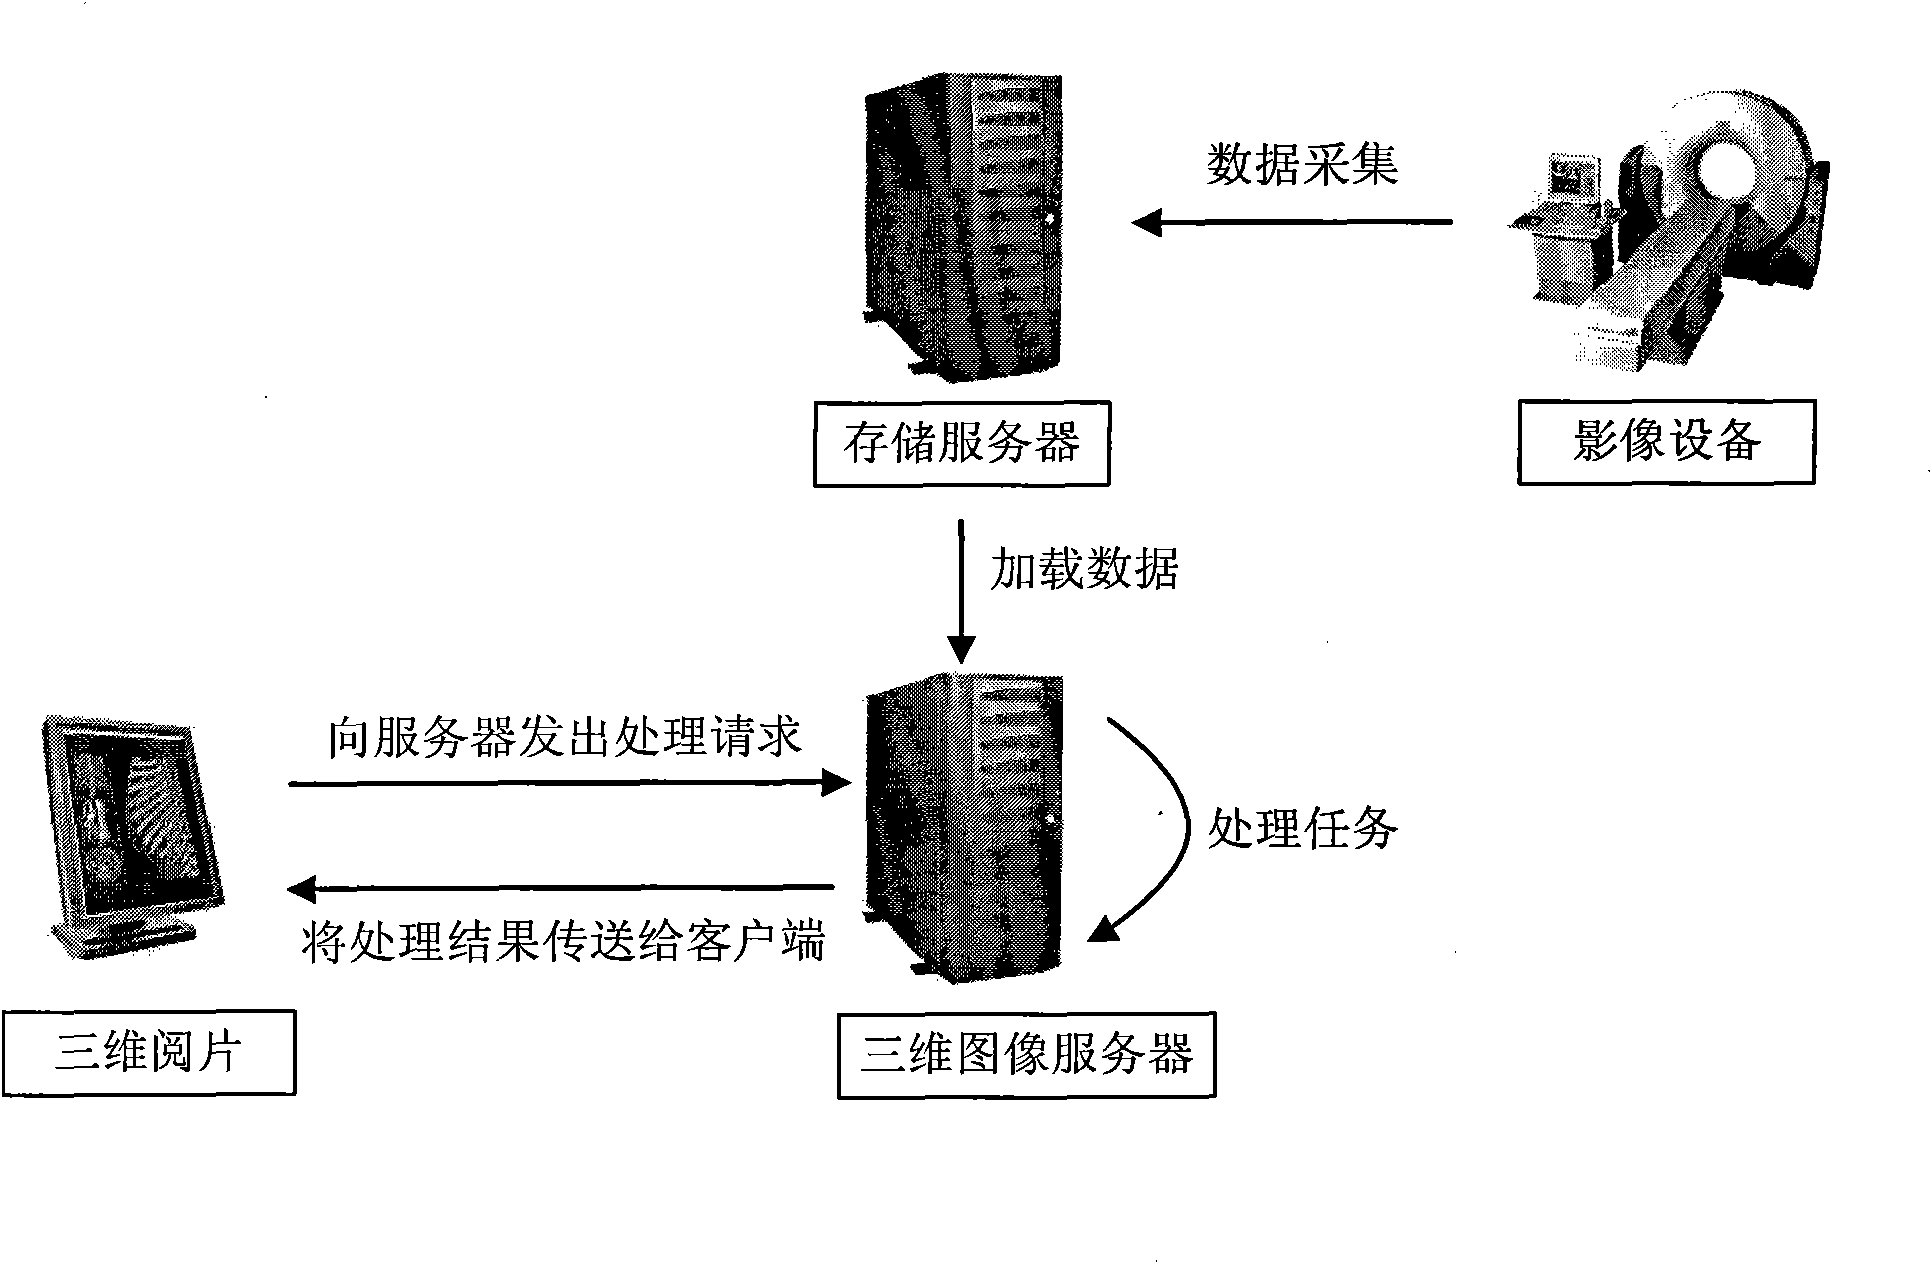 Method for realizing communication between three-dimensional image server and client